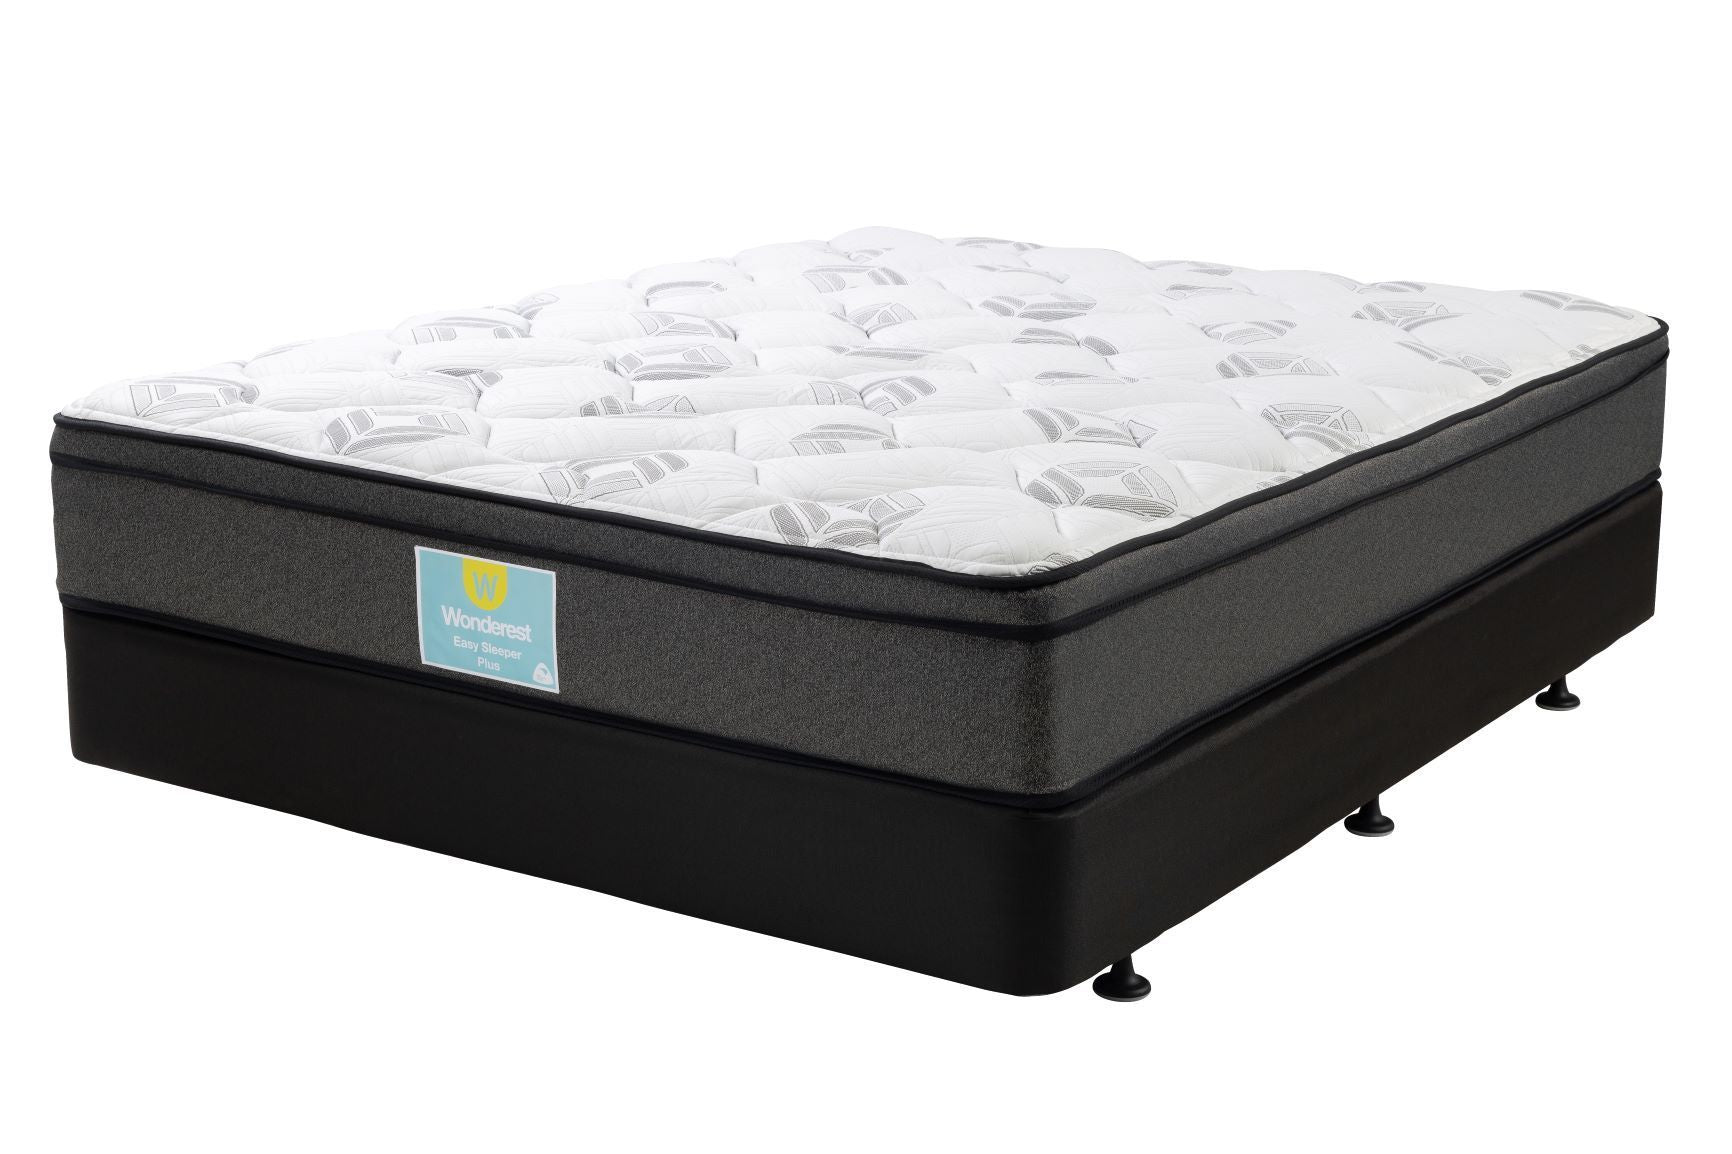 King Size Bed Nz King Bed King Size Mattress Nz Bedsrus